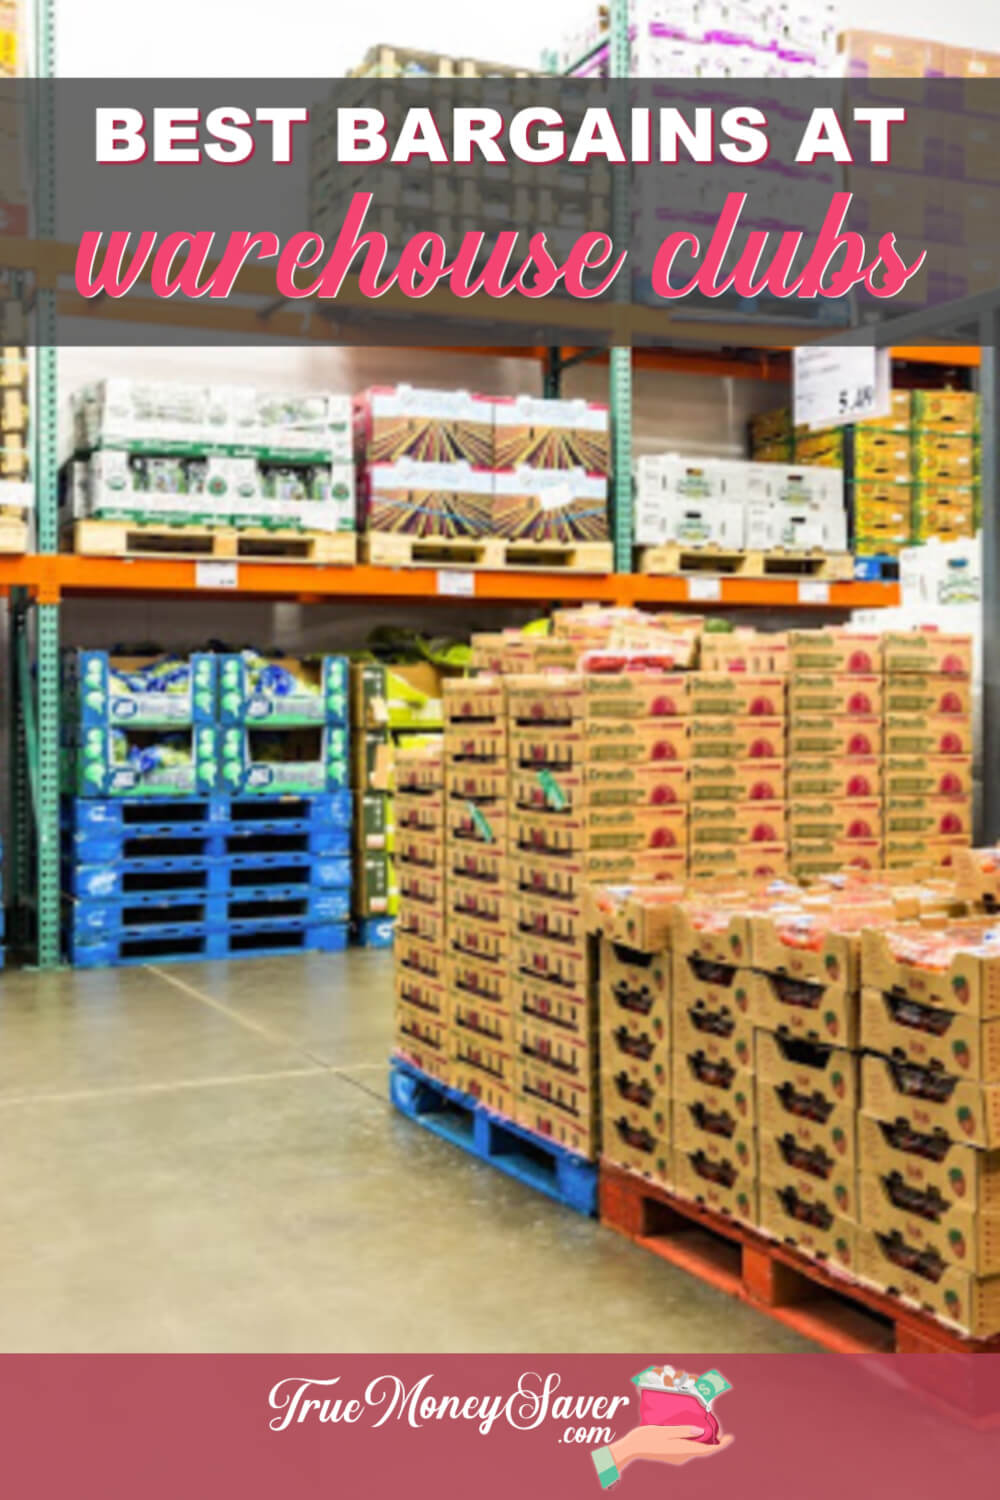 10 Of The Best Bargains You Need To Buy At Warehouse Clubs